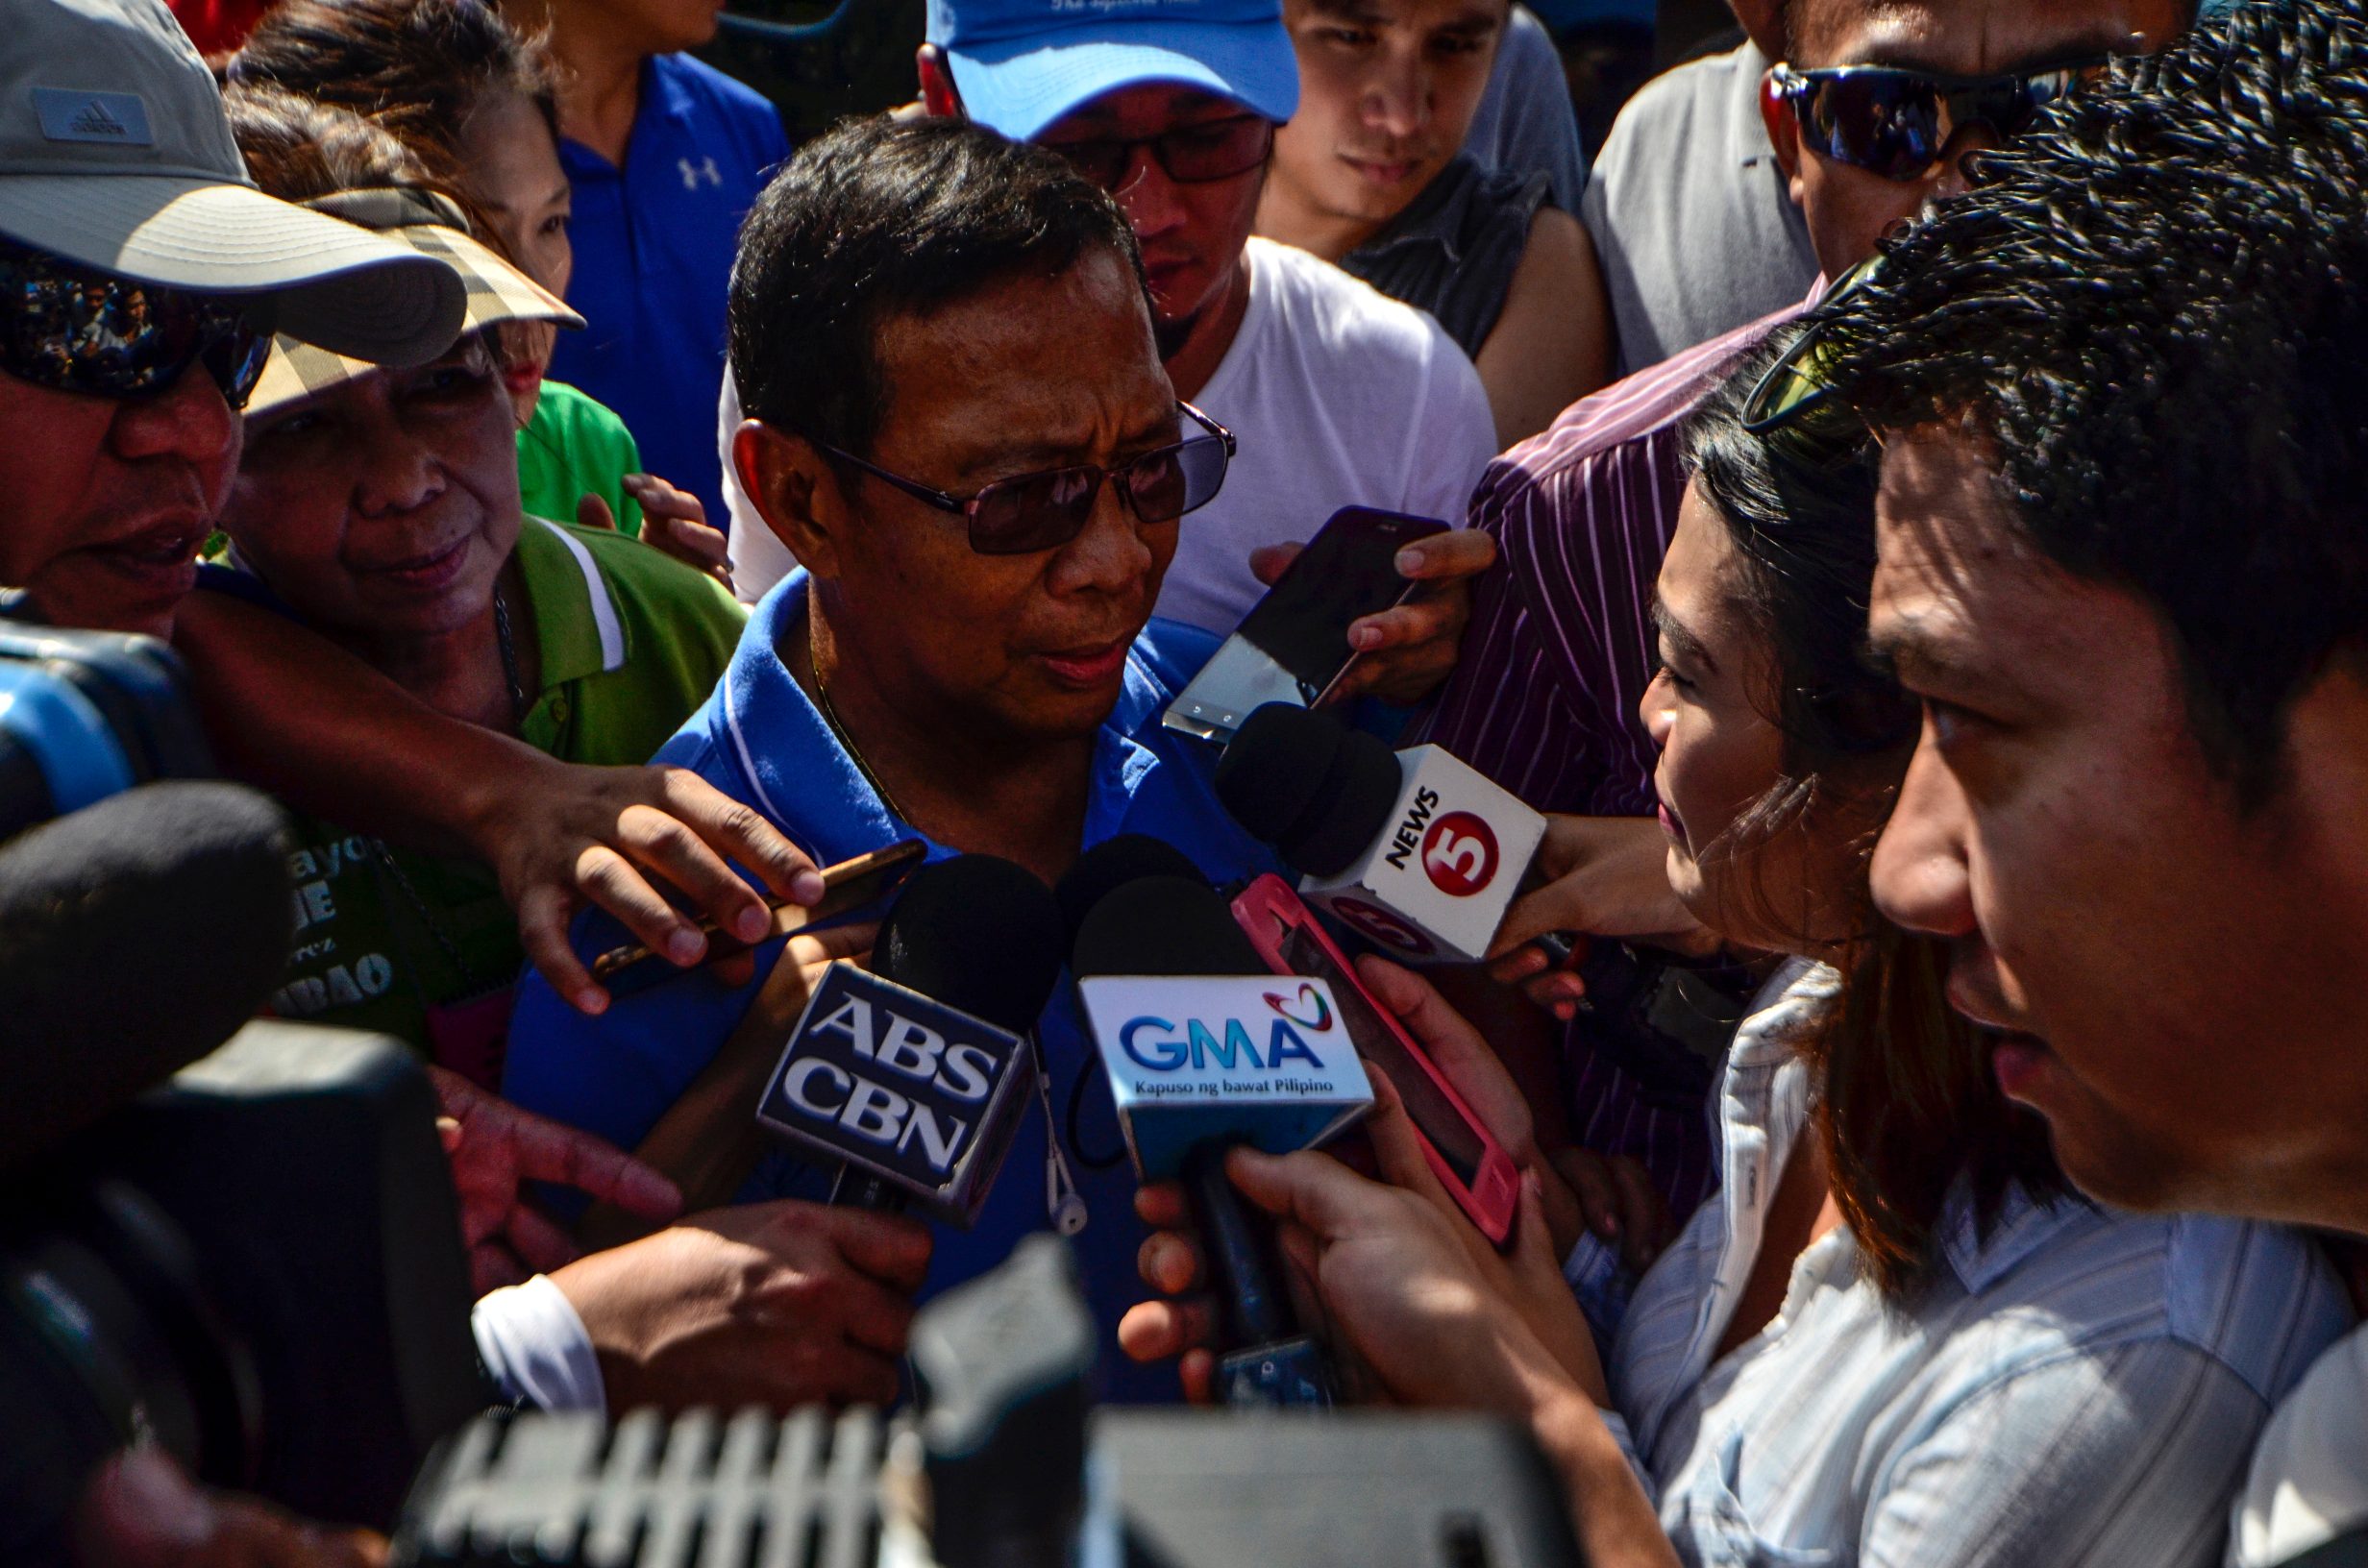 VLOG: 3 days before elections, Binay calls for unity